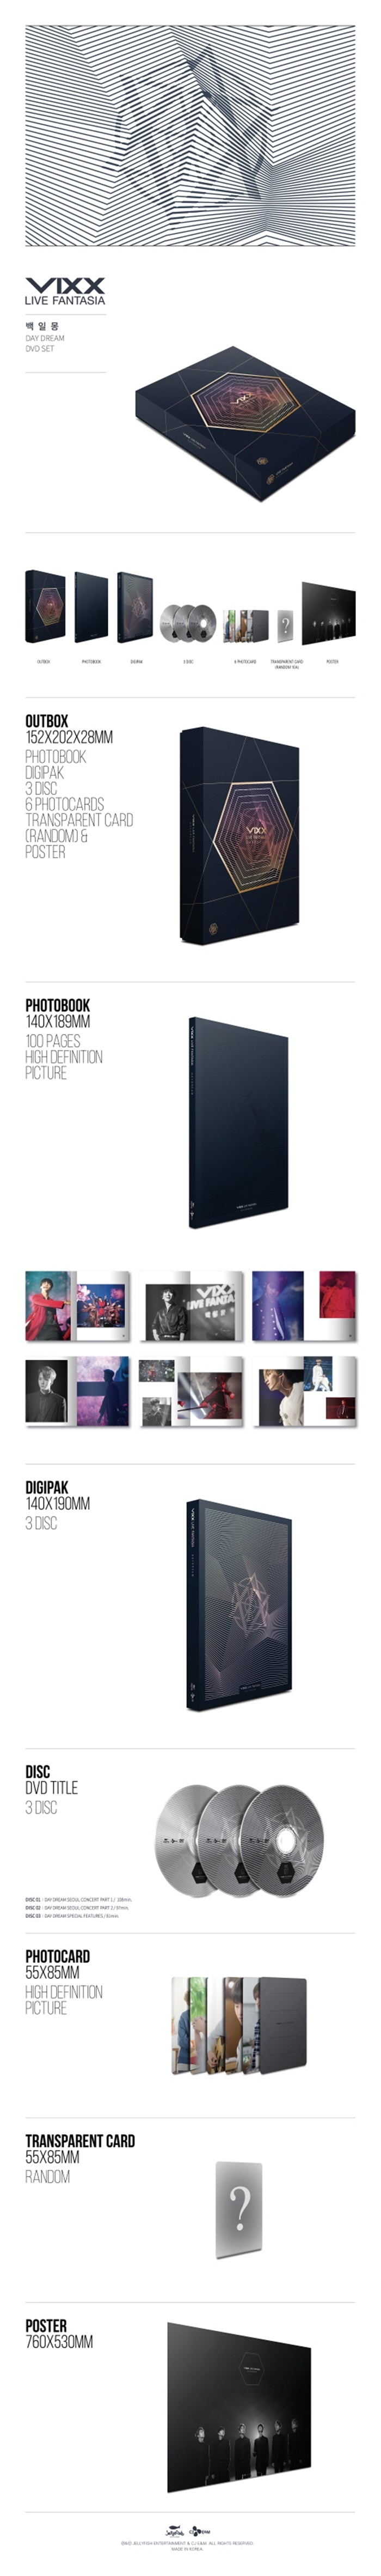 3 DVDs
1 Photo Book (100 pages)
6 Photo Cards
1 Transparent Card